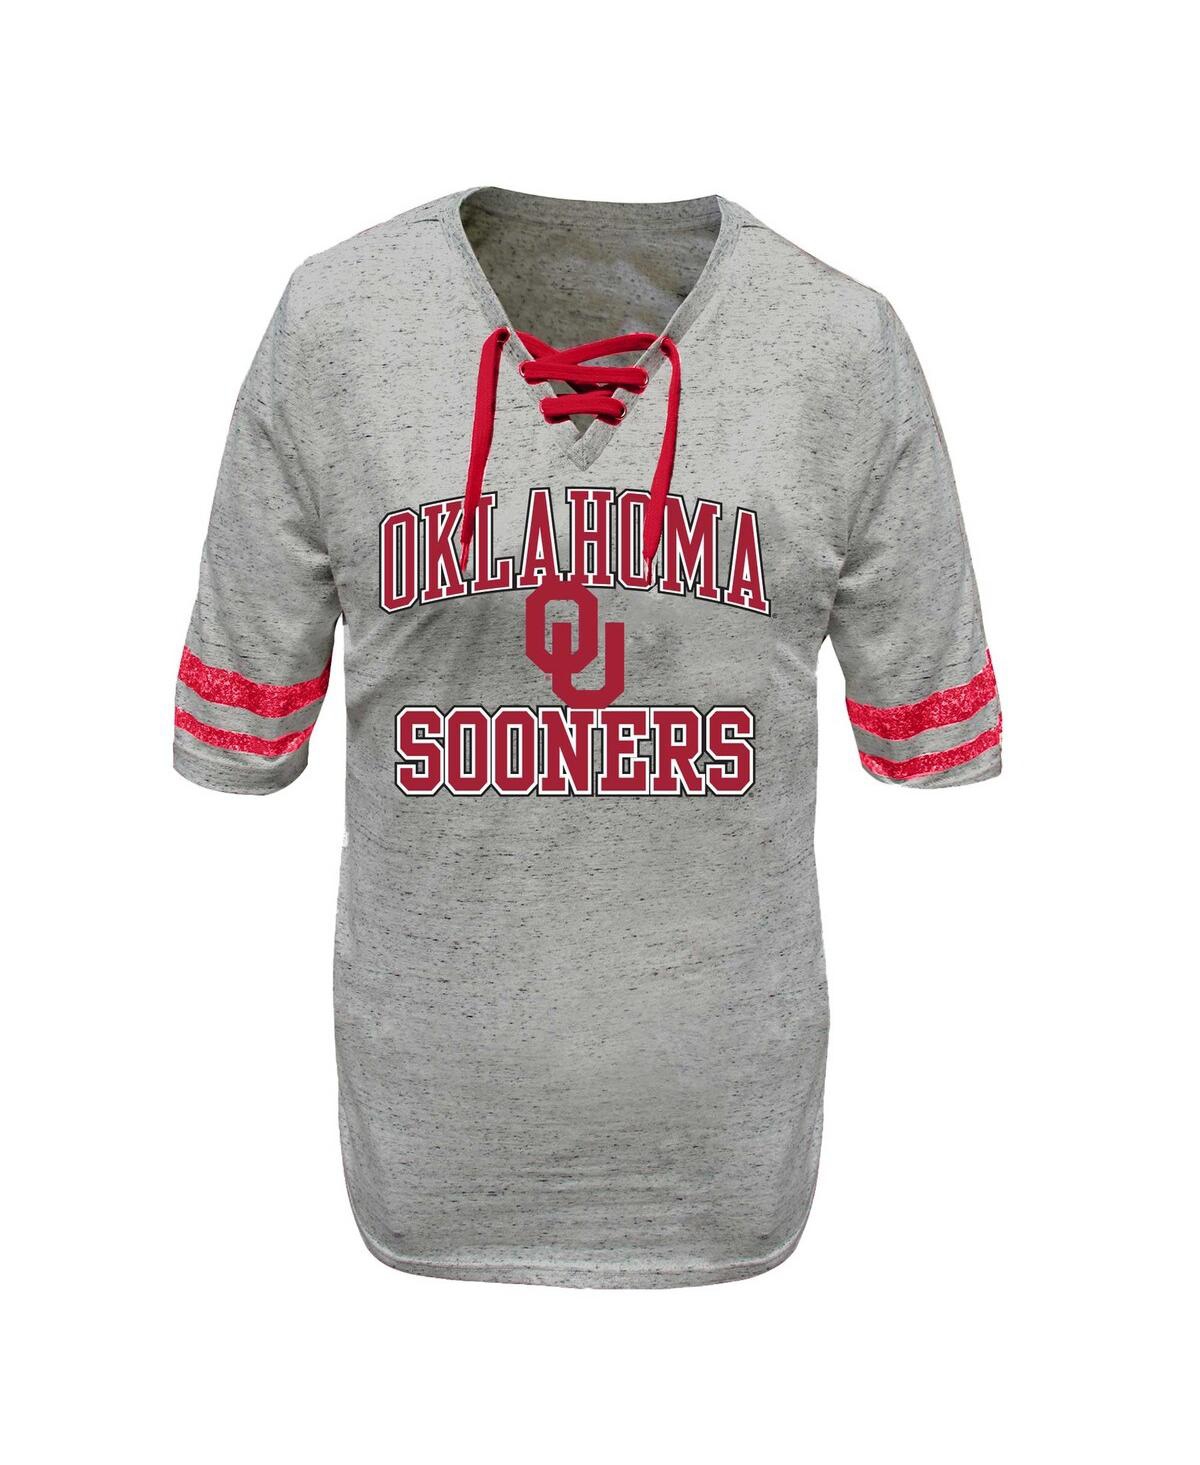 Women's Profile Heather Gray Distressed Oklahoma Sooners Plus Size Striped Lace-Up T-shirt - Heather Gray